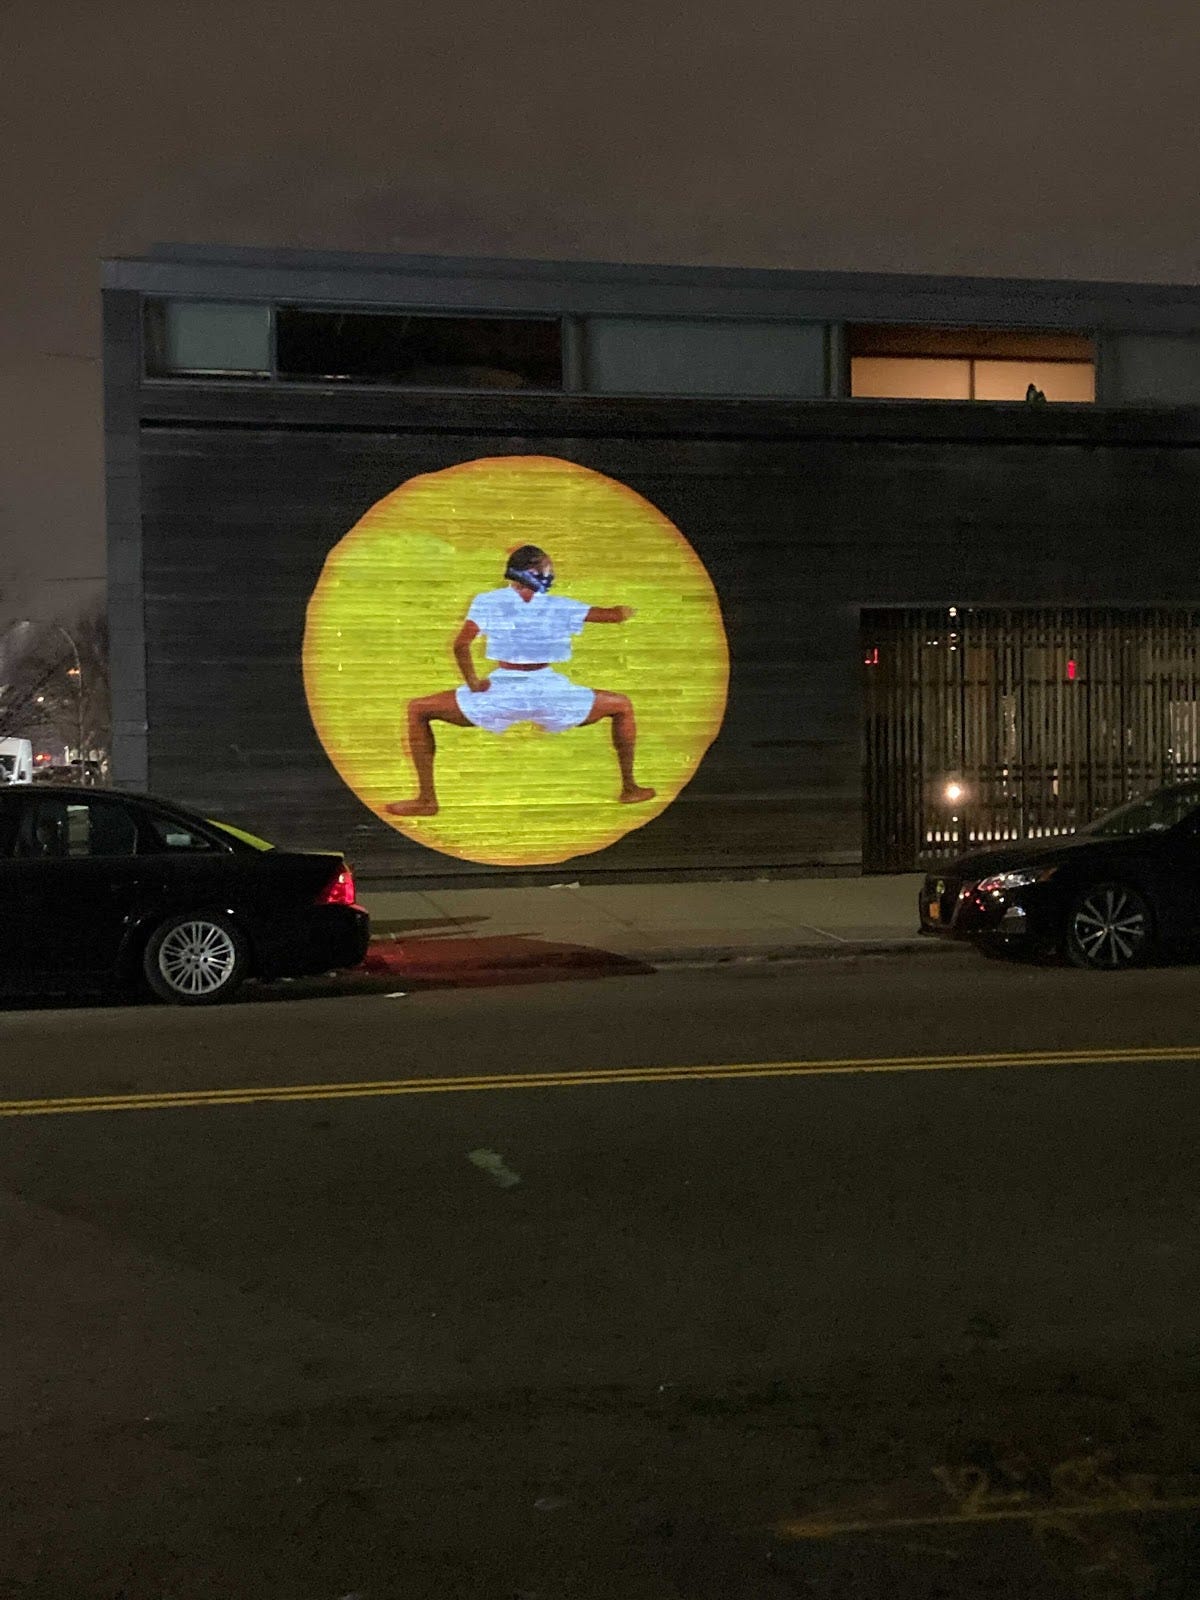 Image description: This is a projected image of a Black woman, wearing a white shirt,  white shorts, and a bandanna across her face, dancing against a yellow backdrop from the NationX portal. The projection is occurring at night against a wall in a Brooklyn neighborhood.  